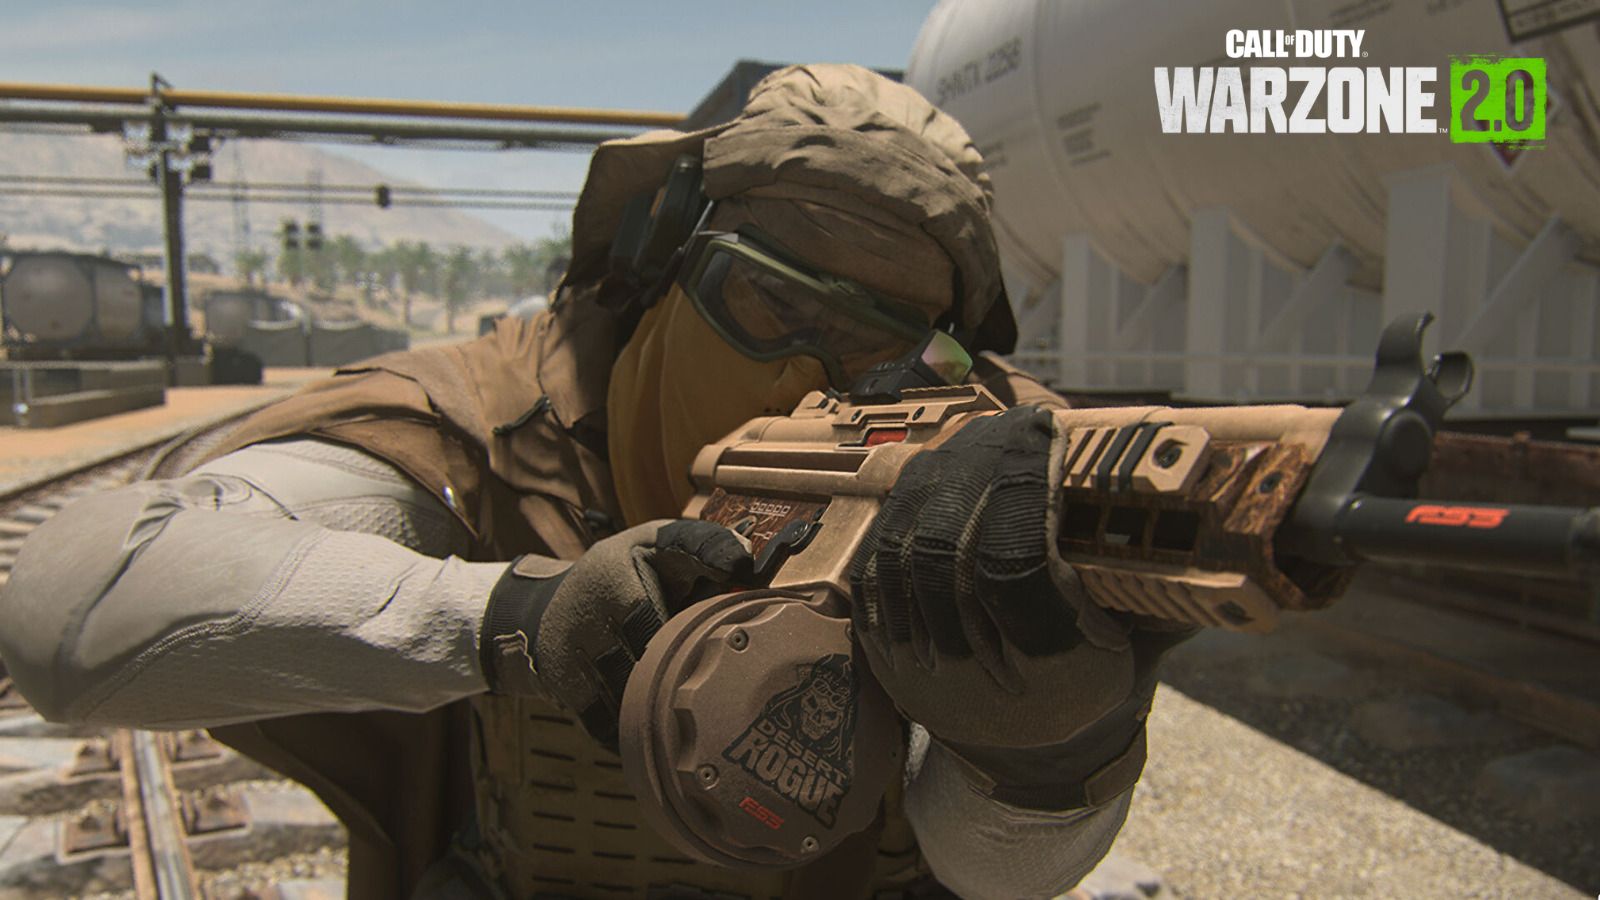 image for article: "Best TAQ V Warzone 2 loadout: Class setup, attachments, Perks"